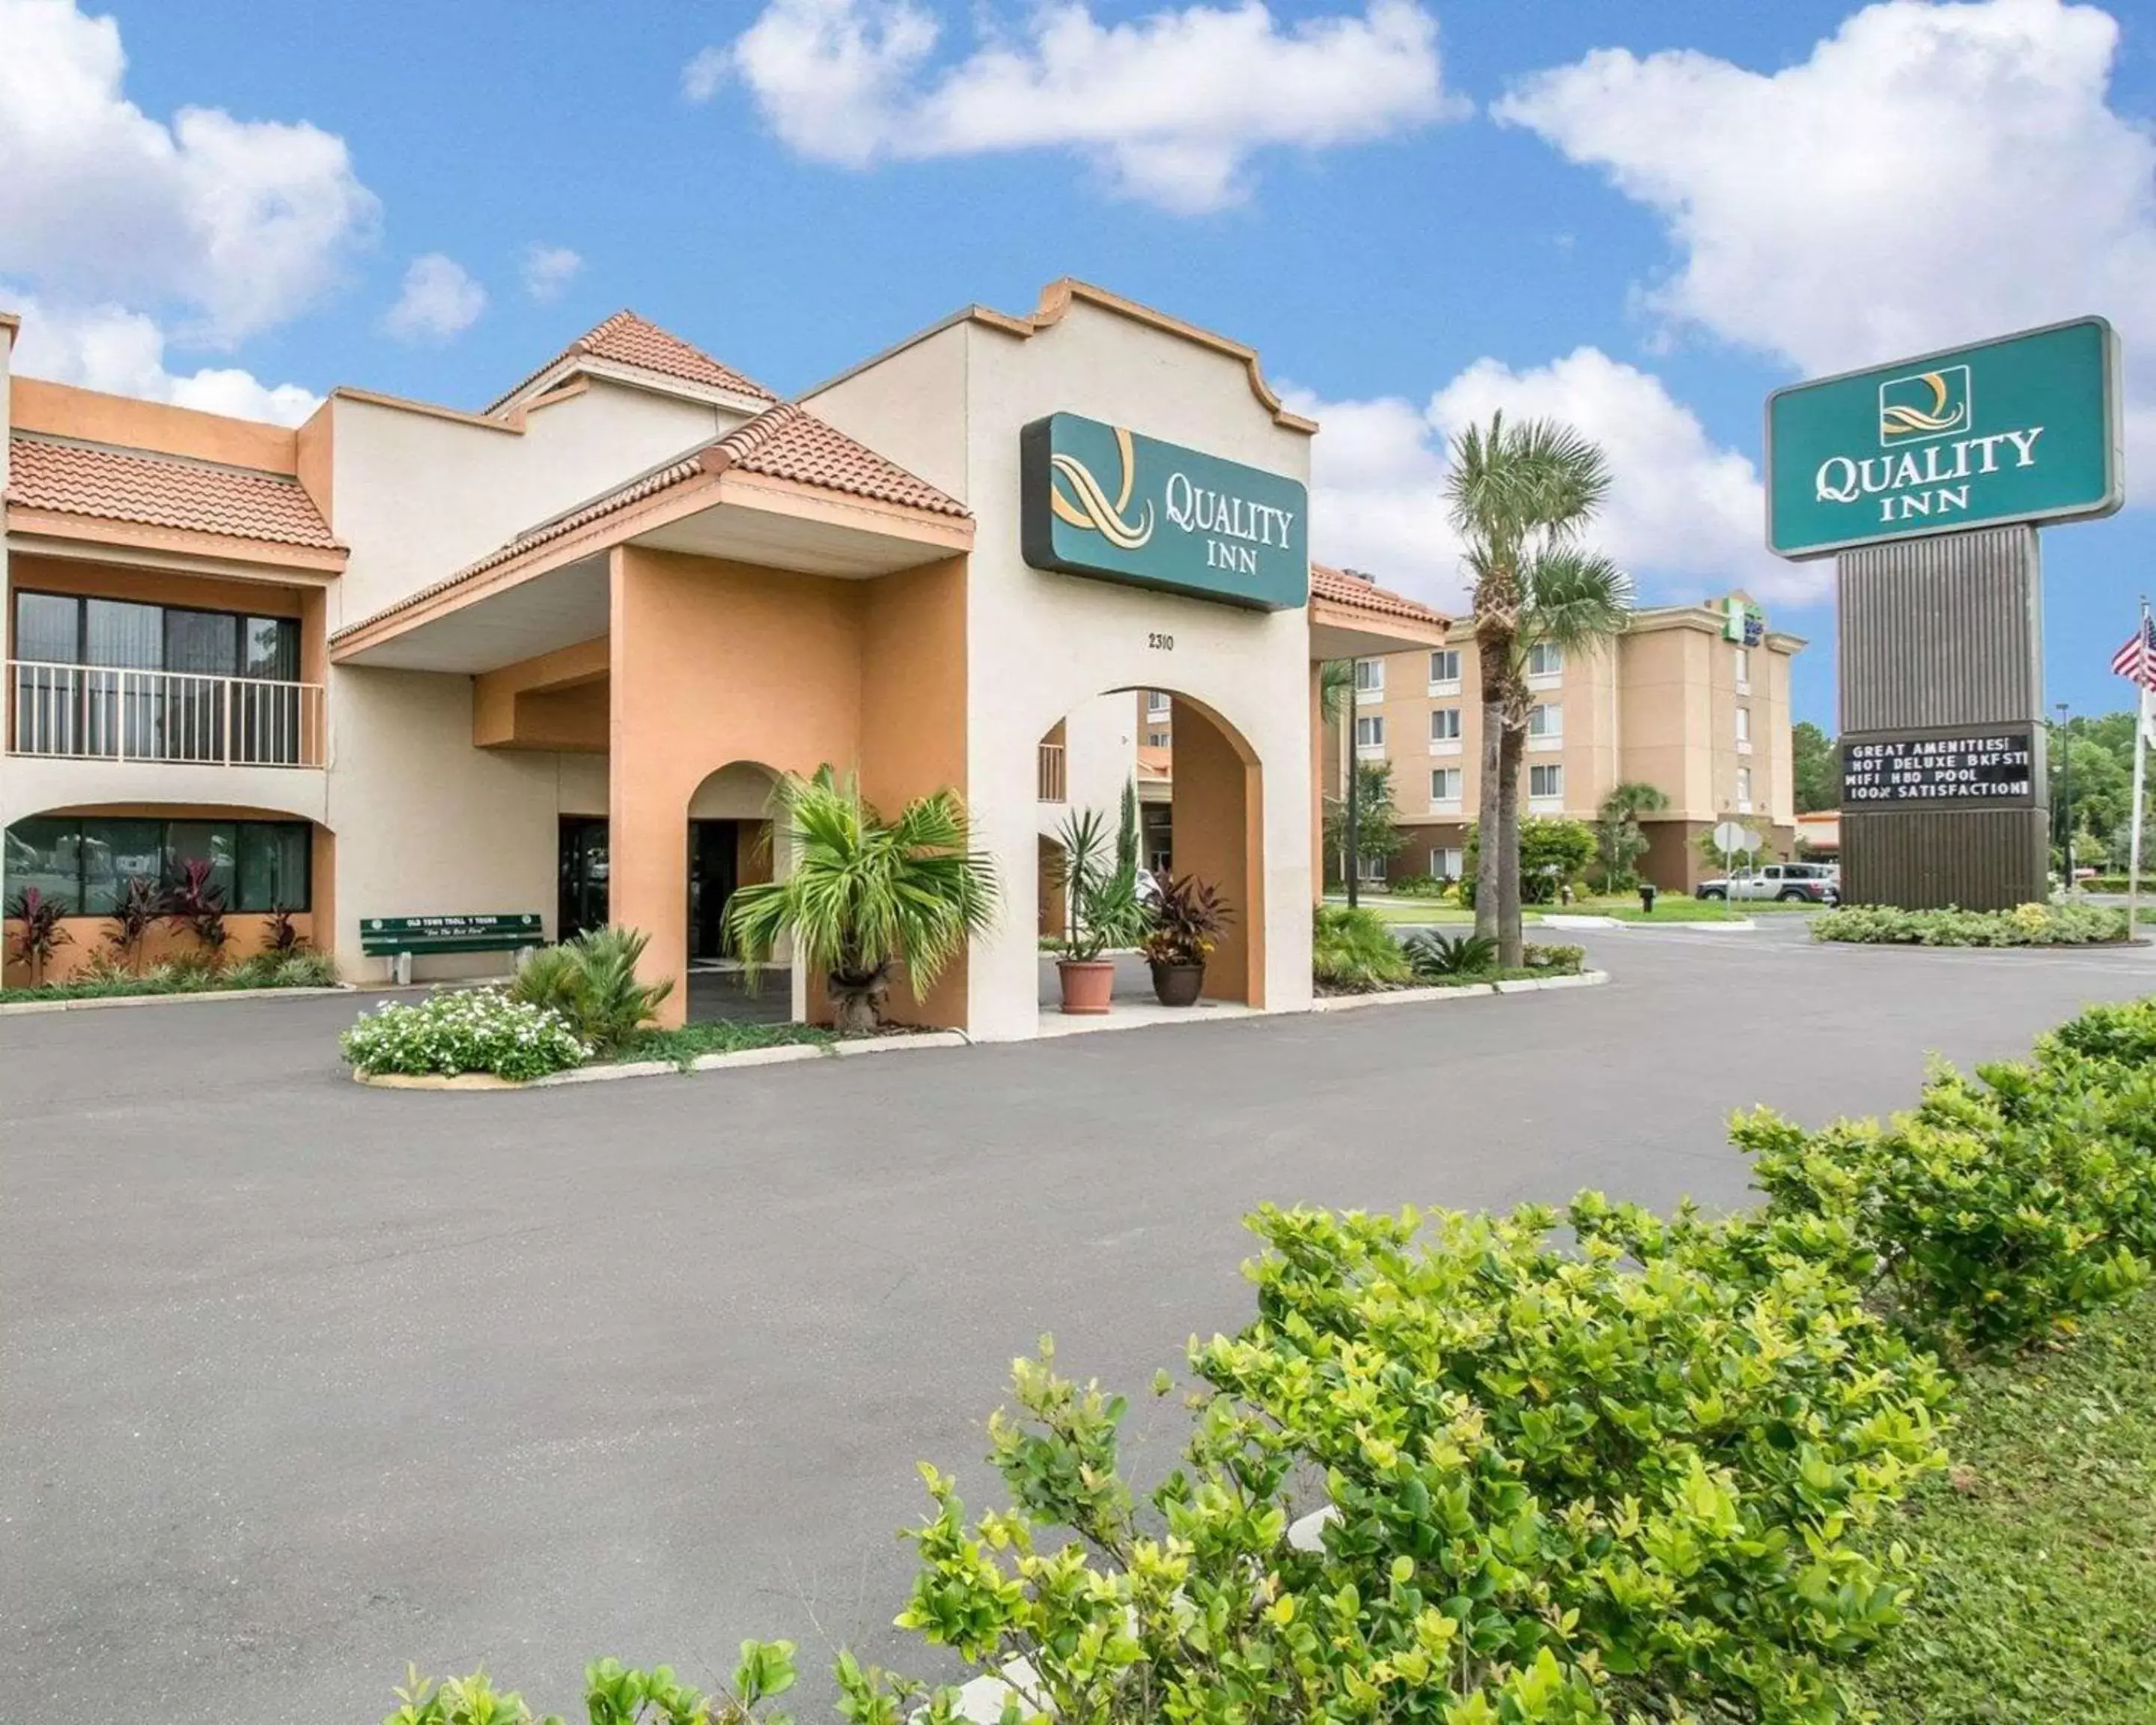 Property building in Quality Inn - Saint Augustine Outlet Mall